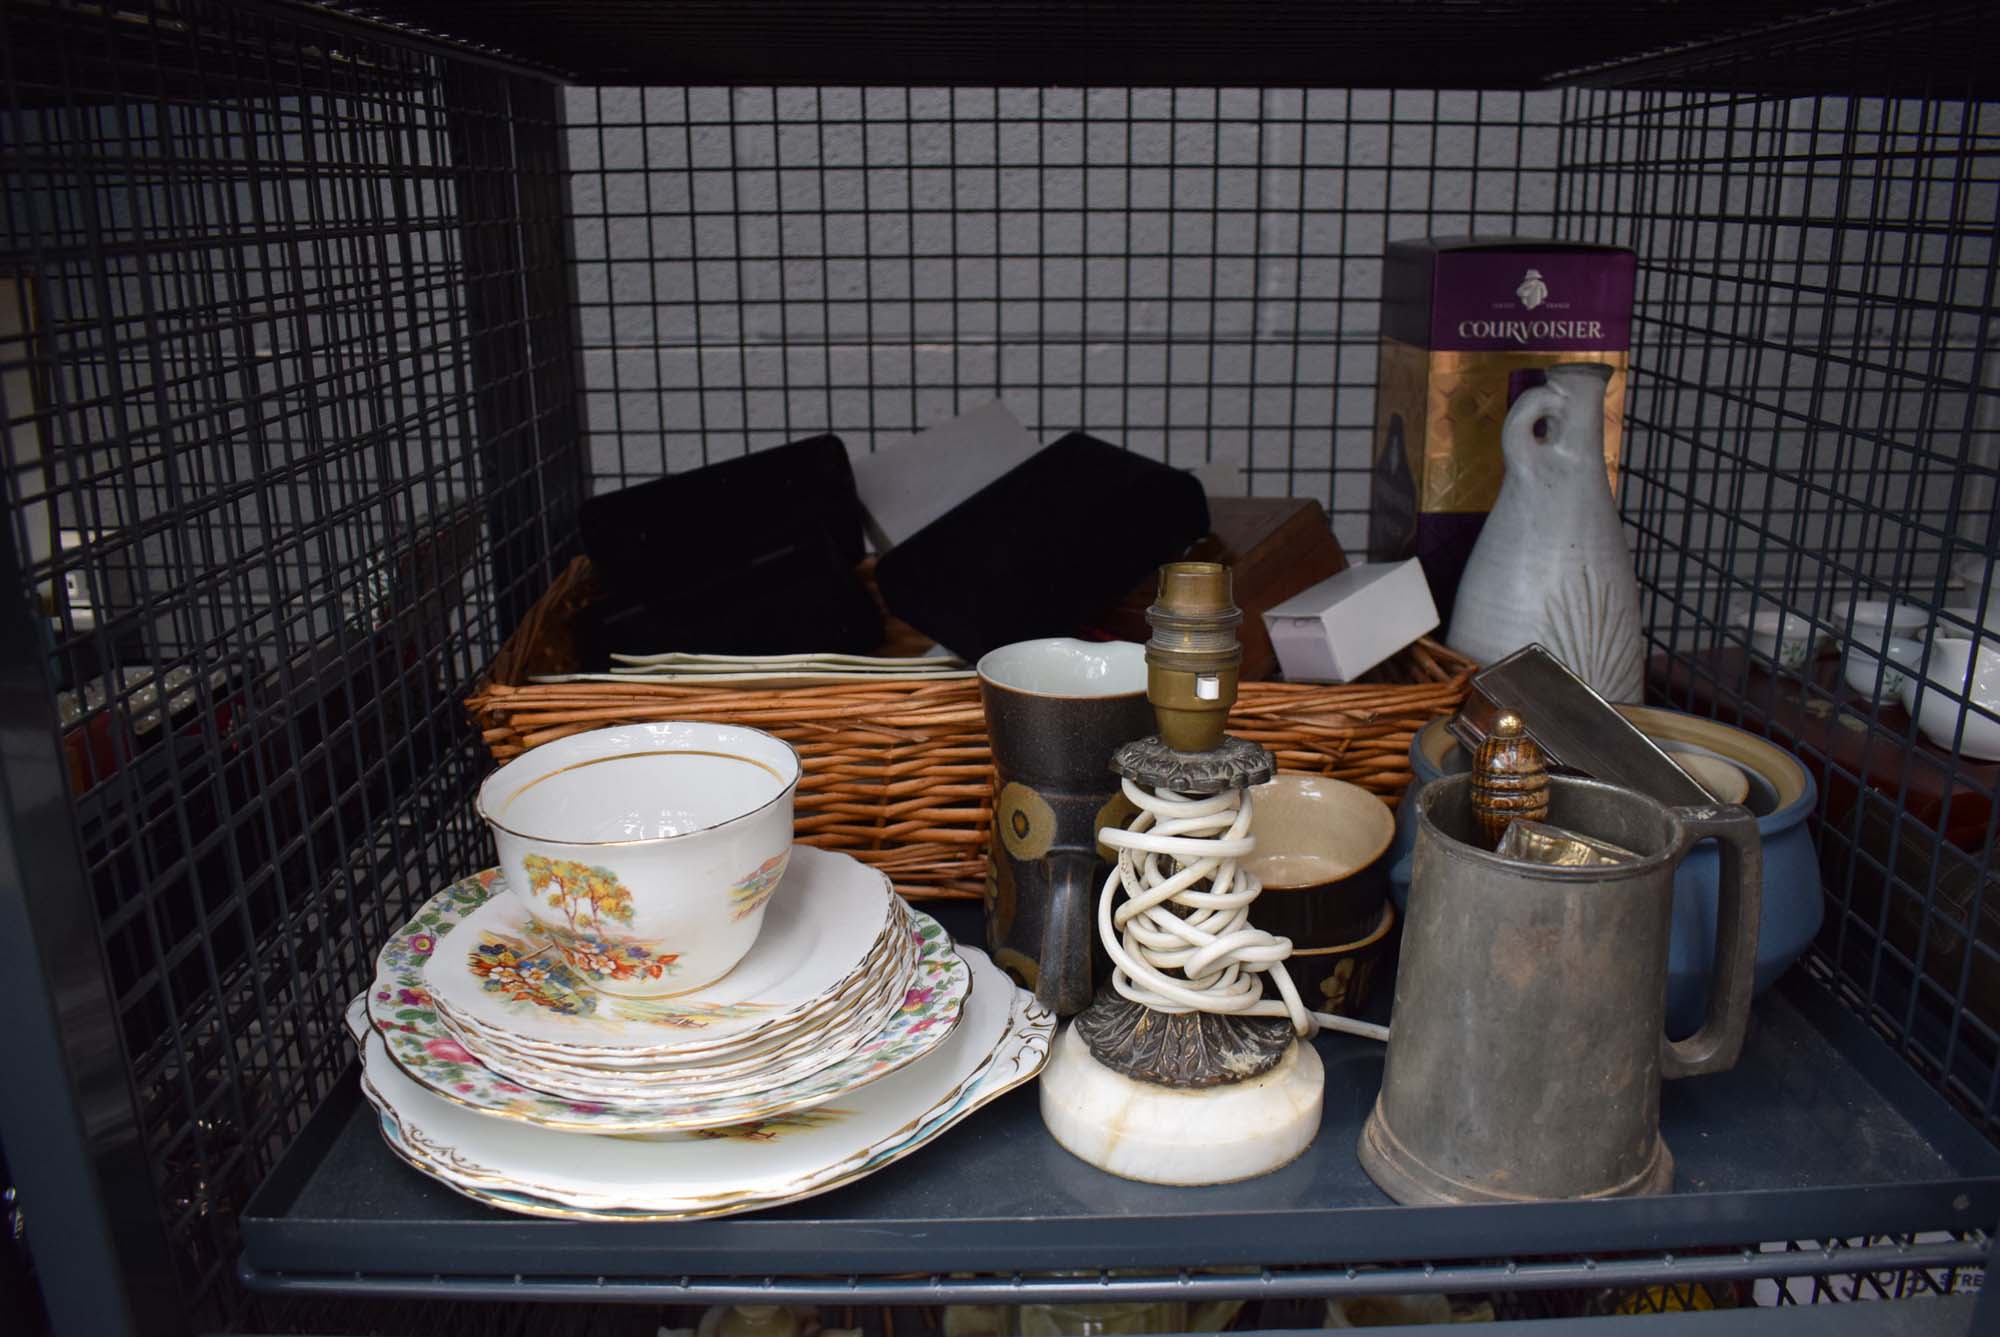 Cage containing a wicker basket, general crockery, table lamp and a pewter mug